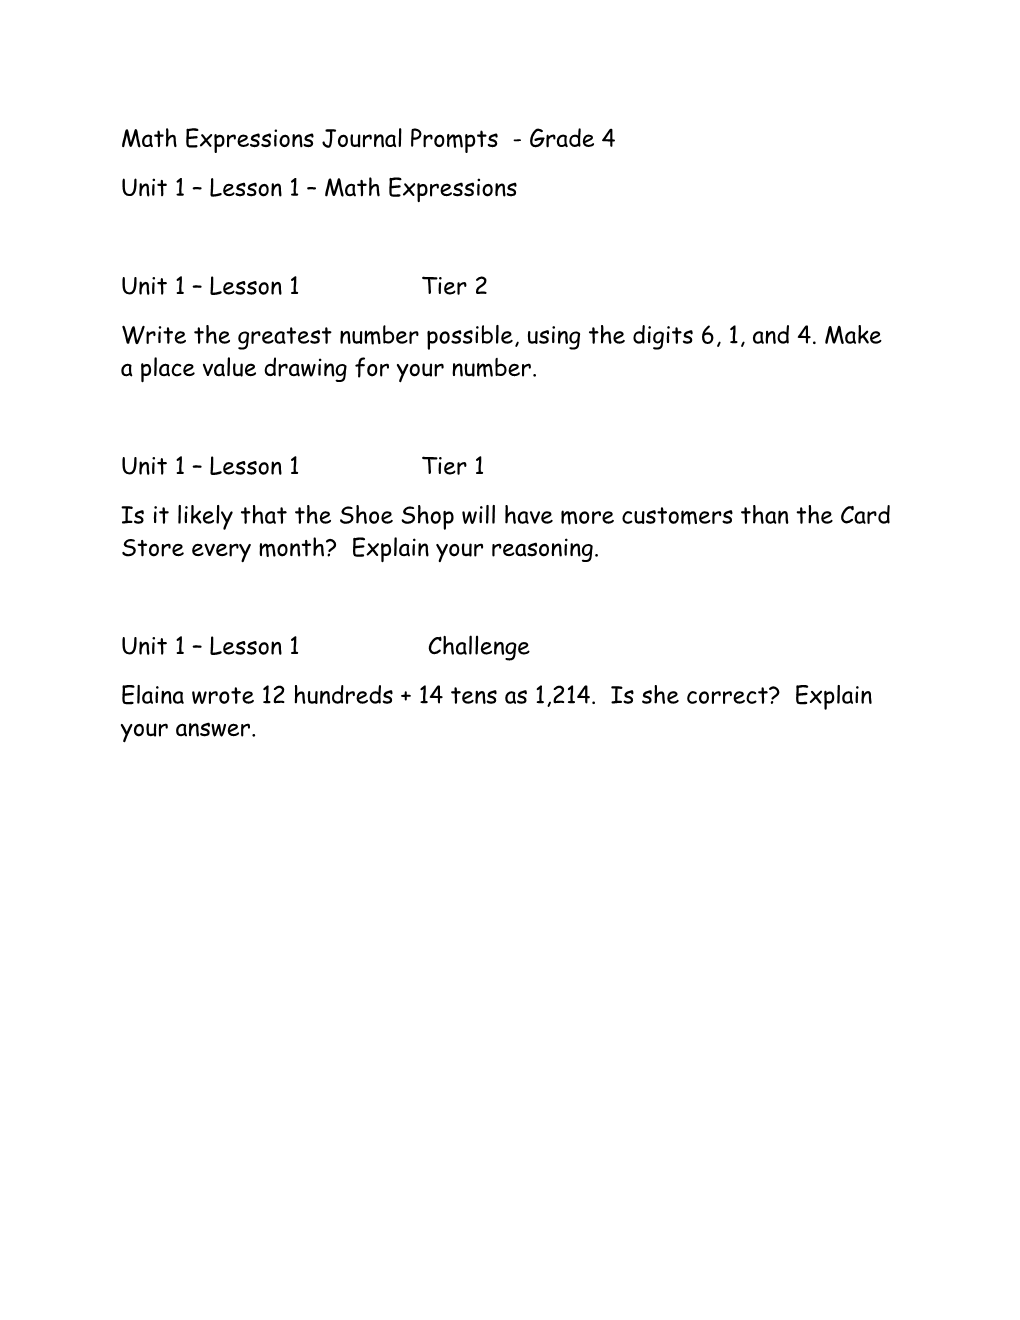 Math Expressions Journal Prompts - Grade 4